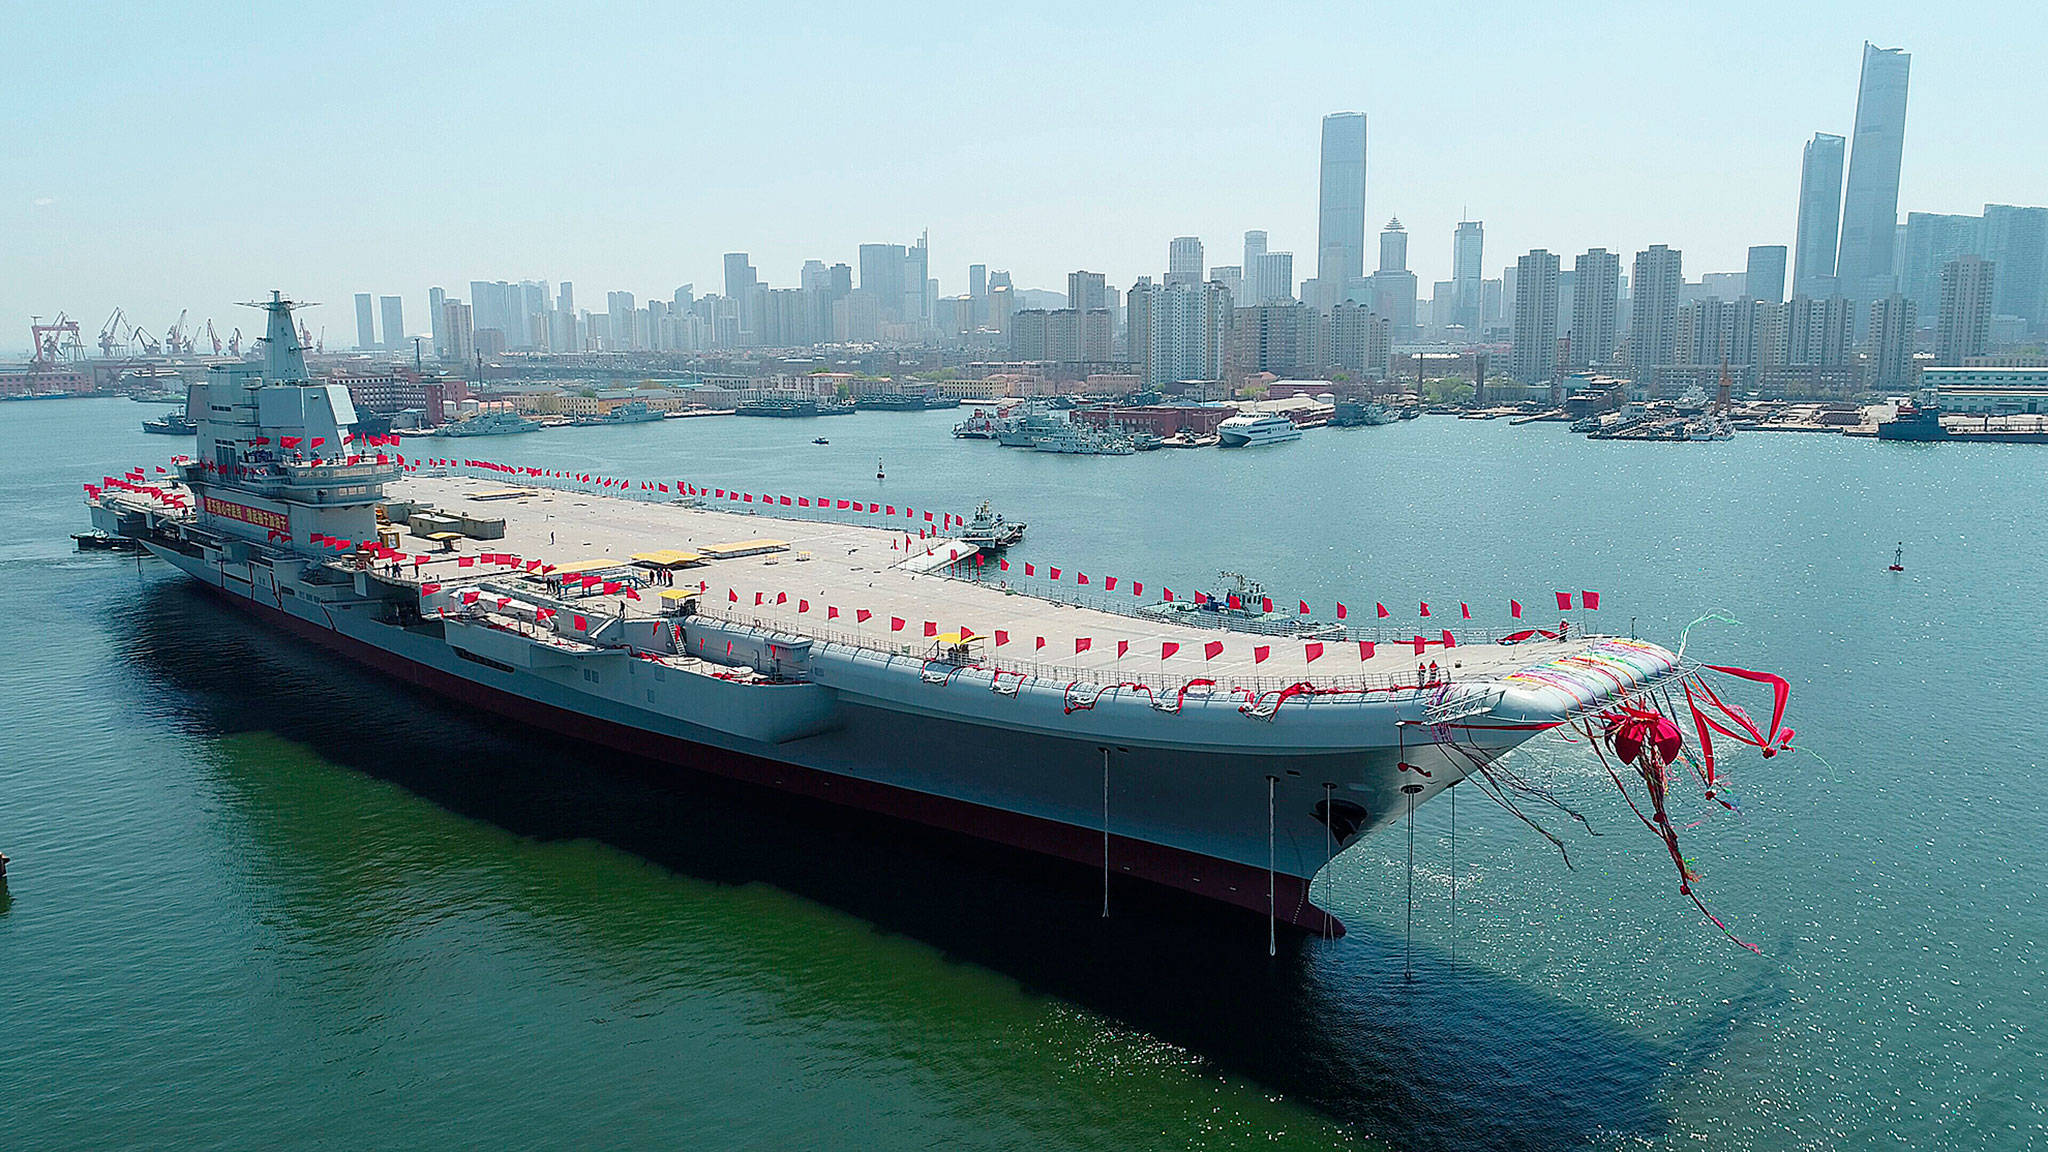 China’s first aircraft carrier, the Liaoning, is transferred from dry dock into the water at a launch ceremony at a shipyard in Dalian in 2017. (Li Gang / Xinhua)